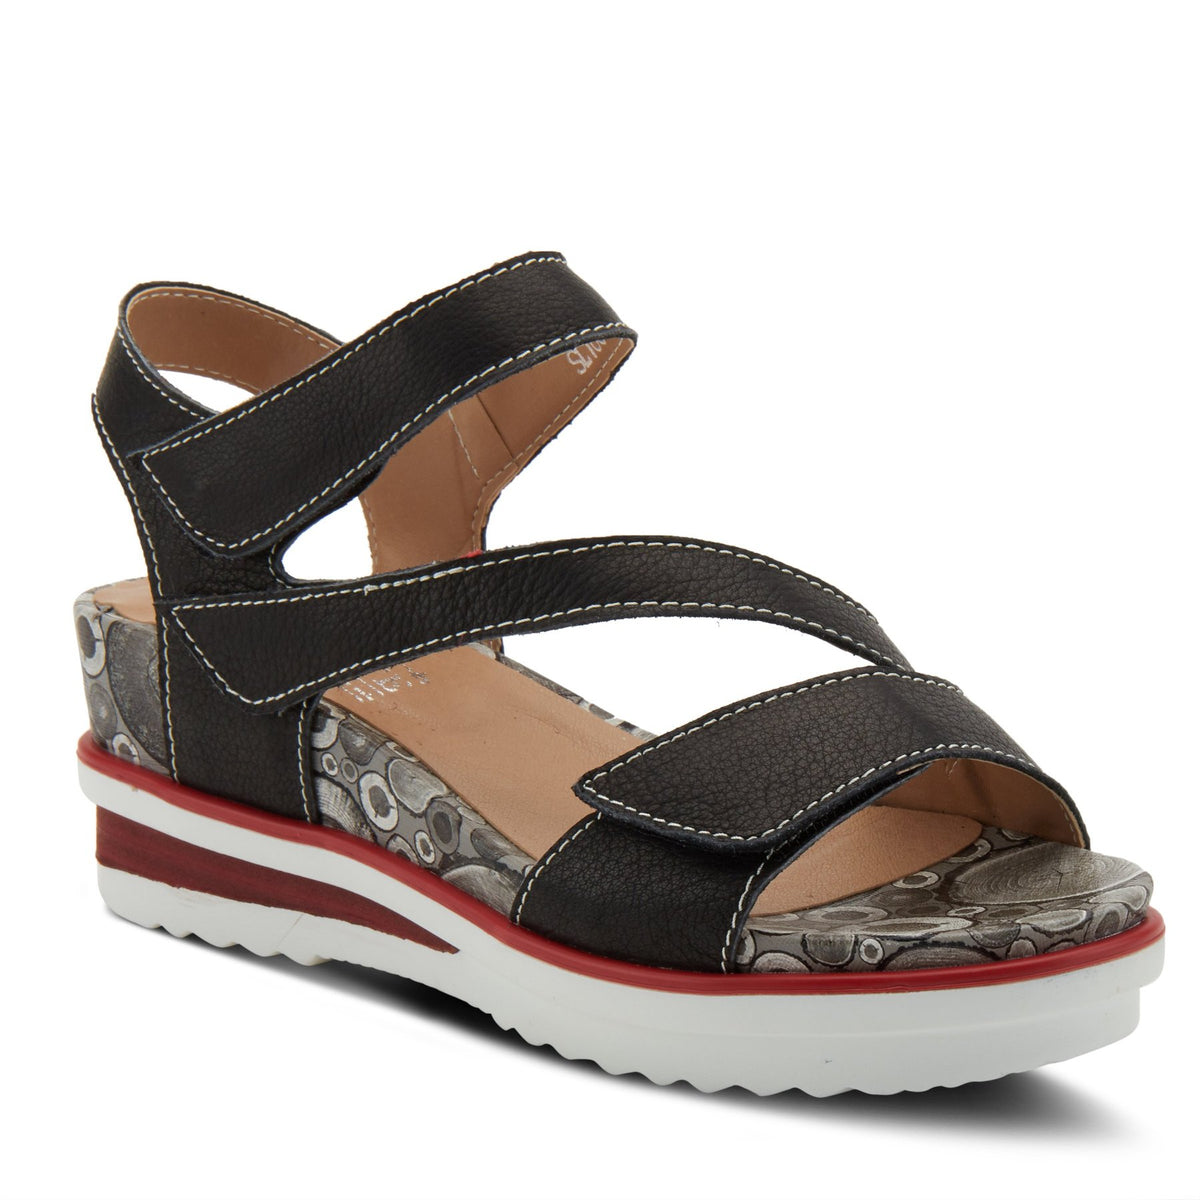 L`Artiste by Springstep Footwear ELONA Sandal is a truly eye-catching combination of hand-painted elements in a leather asymmetrical sandal featuring a total custom fit design with three (3) adjustable hook and loop straps and tonal stitchwork all on a leather-wrapped, comfort wedge with a platform. 